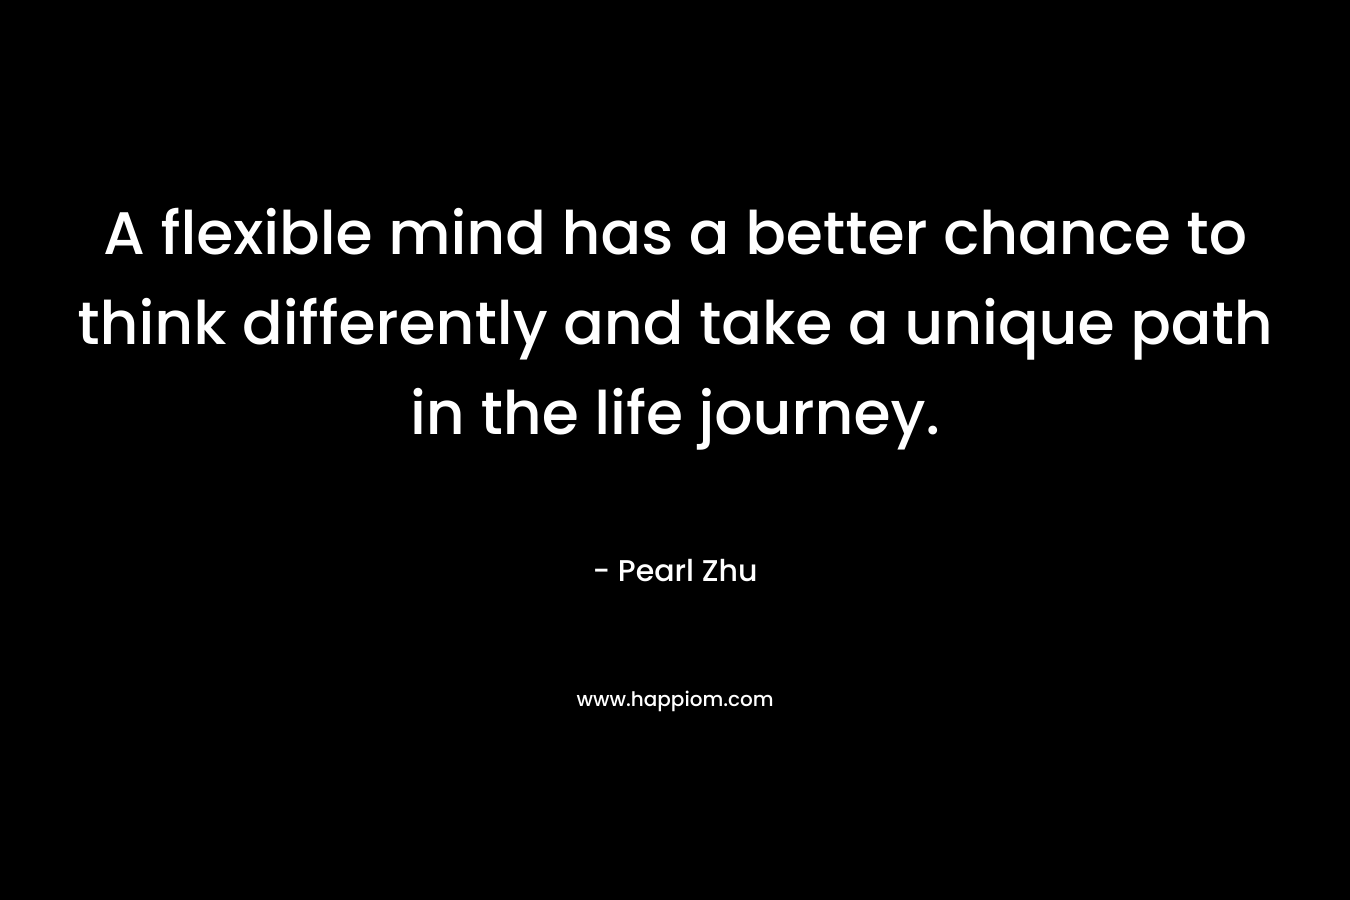 A flexible mind has a better chance to think differently and take a unique path in the life journey.